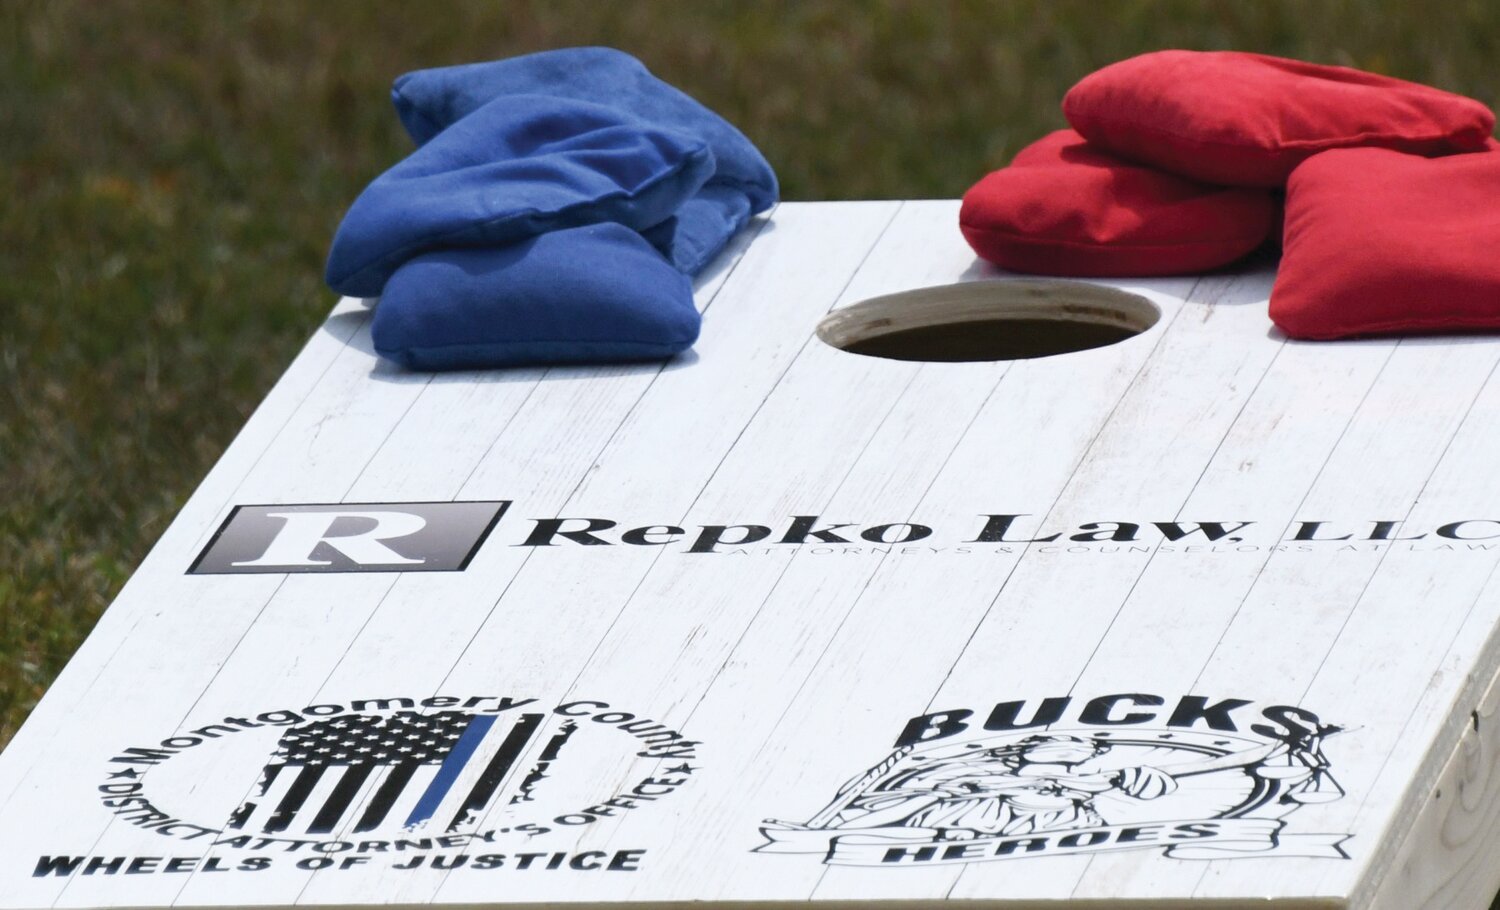 One of the cornhole boards used during the tournament.